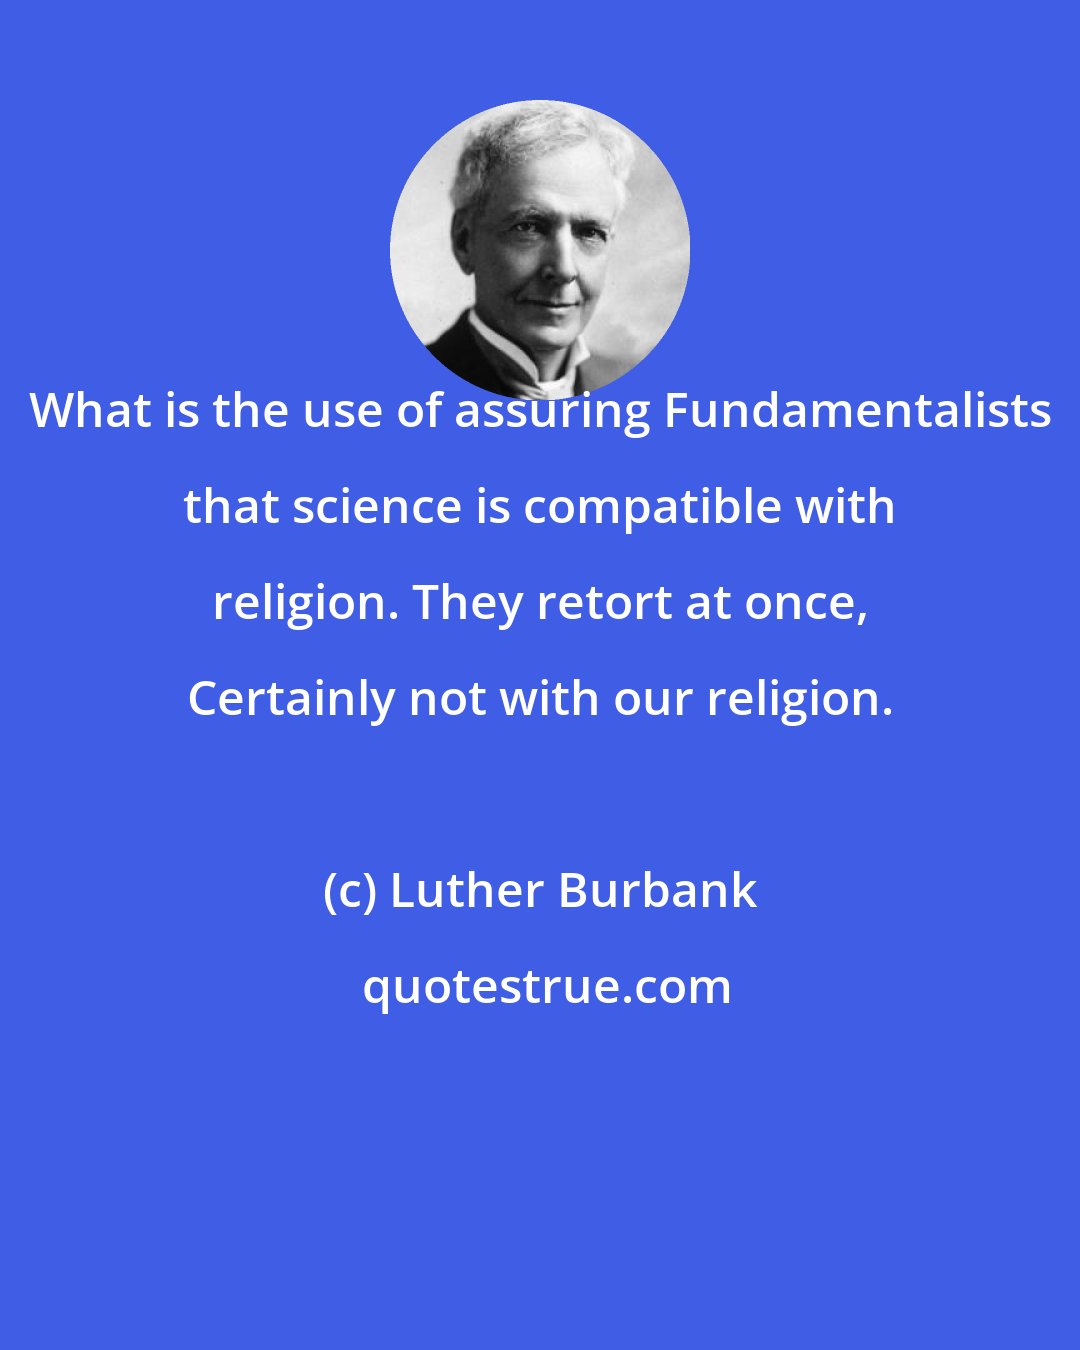 Luther Burbank: What is the use of assuring Fundamentalists that science is compatible with religion. They retort at once, Certainly not with our religion.